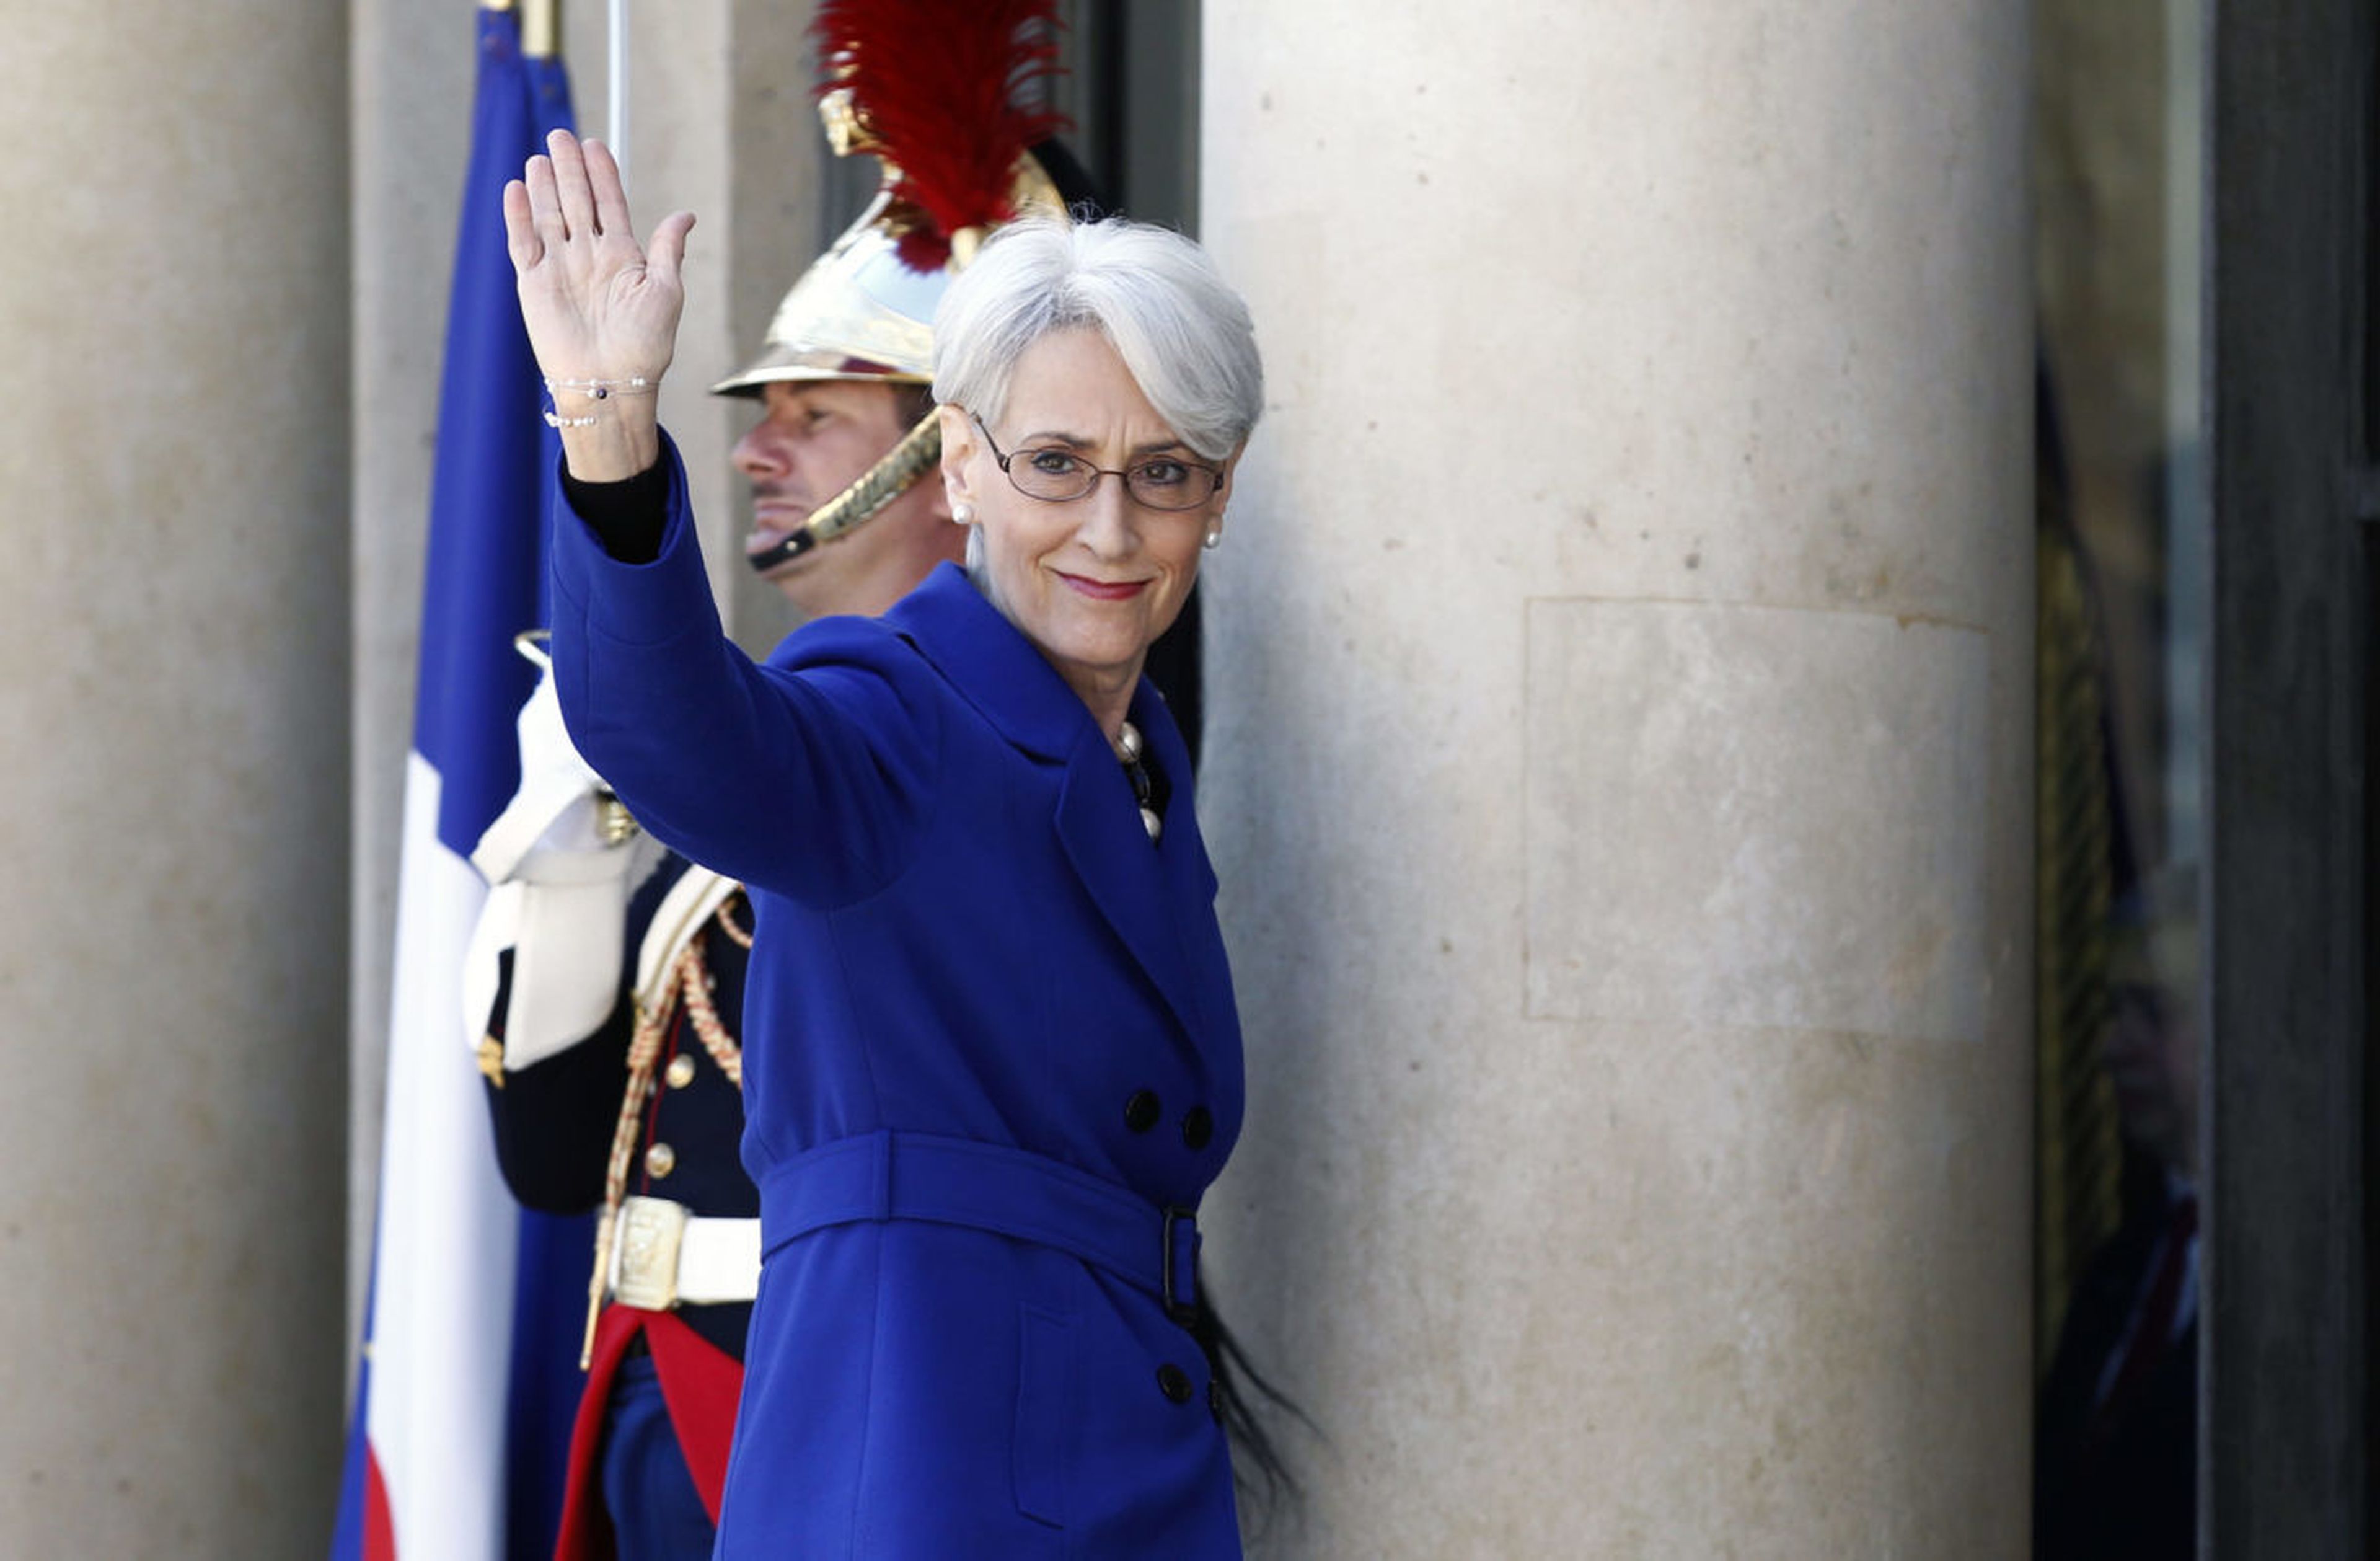 Wendy Sherman arrives for an African security summit on May 17, 2014, at the Elysee palace in Paris. Now deputy secretary of state, Sherman and other officials are proposing a new Bureau of Cyberspace and Digital Policy. (Photo by Thierry Chesnot/Getty Images)